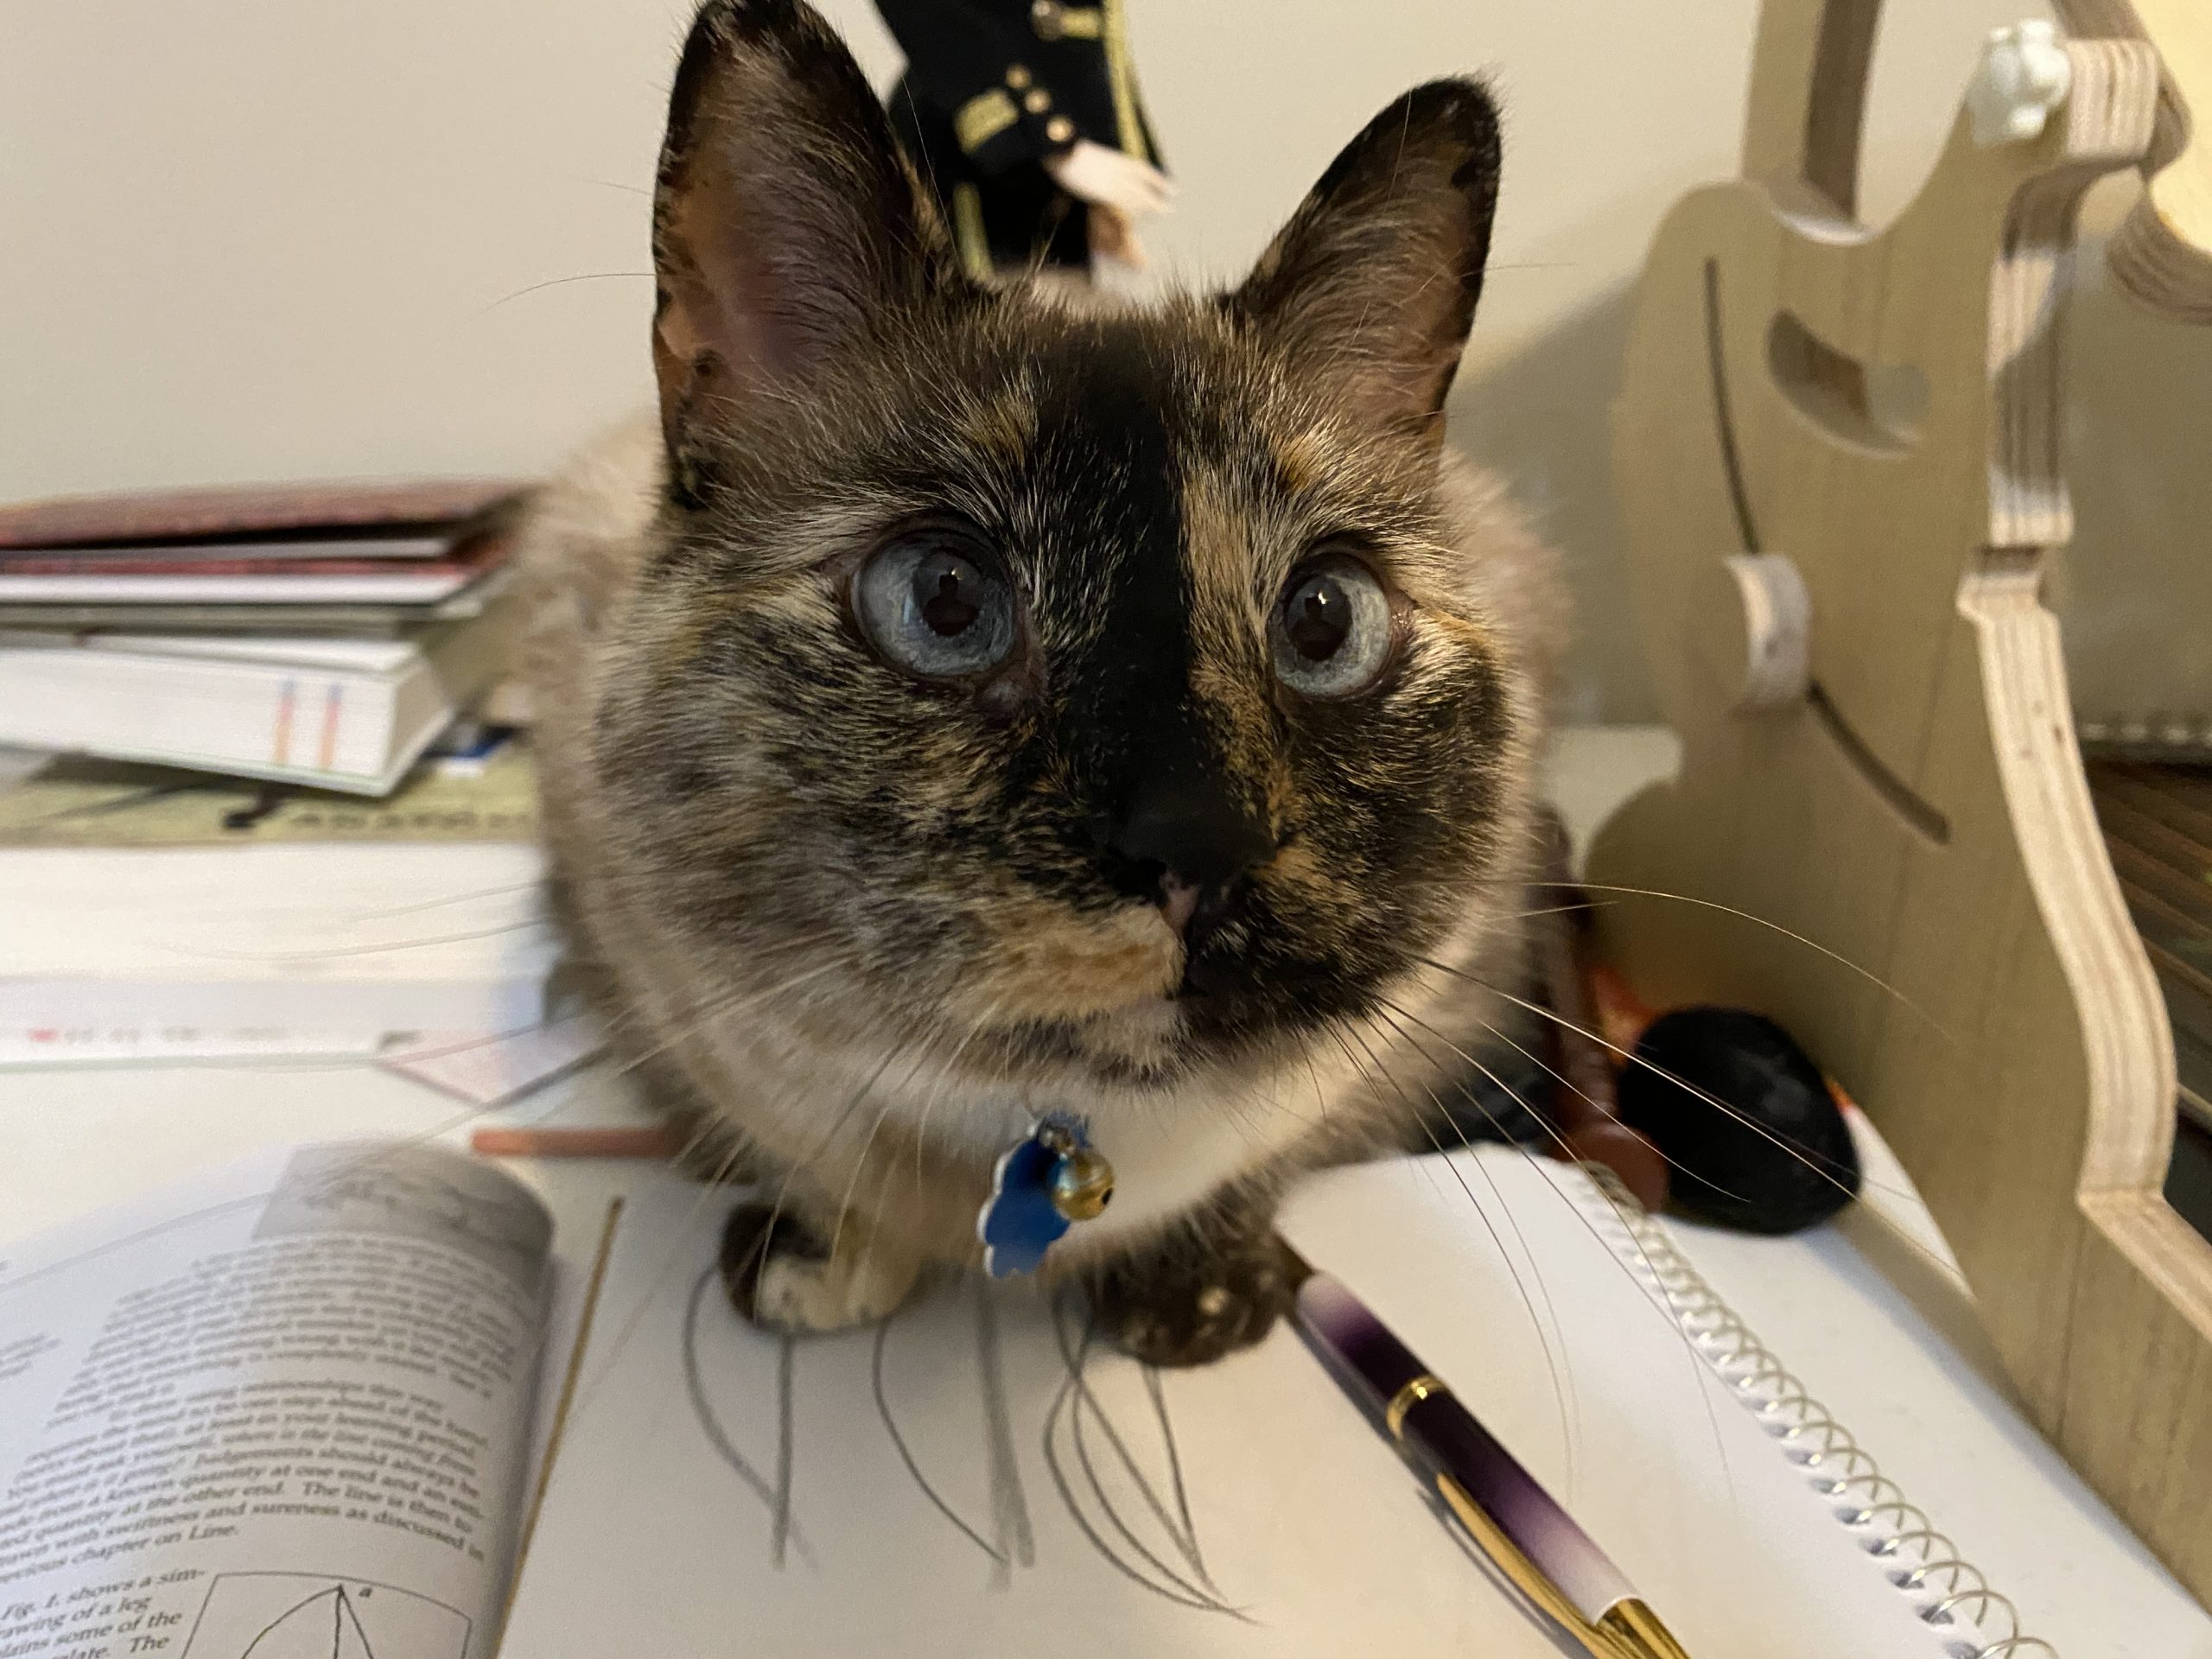 a cat crouches on top of a sketchbook next to an art instruction book